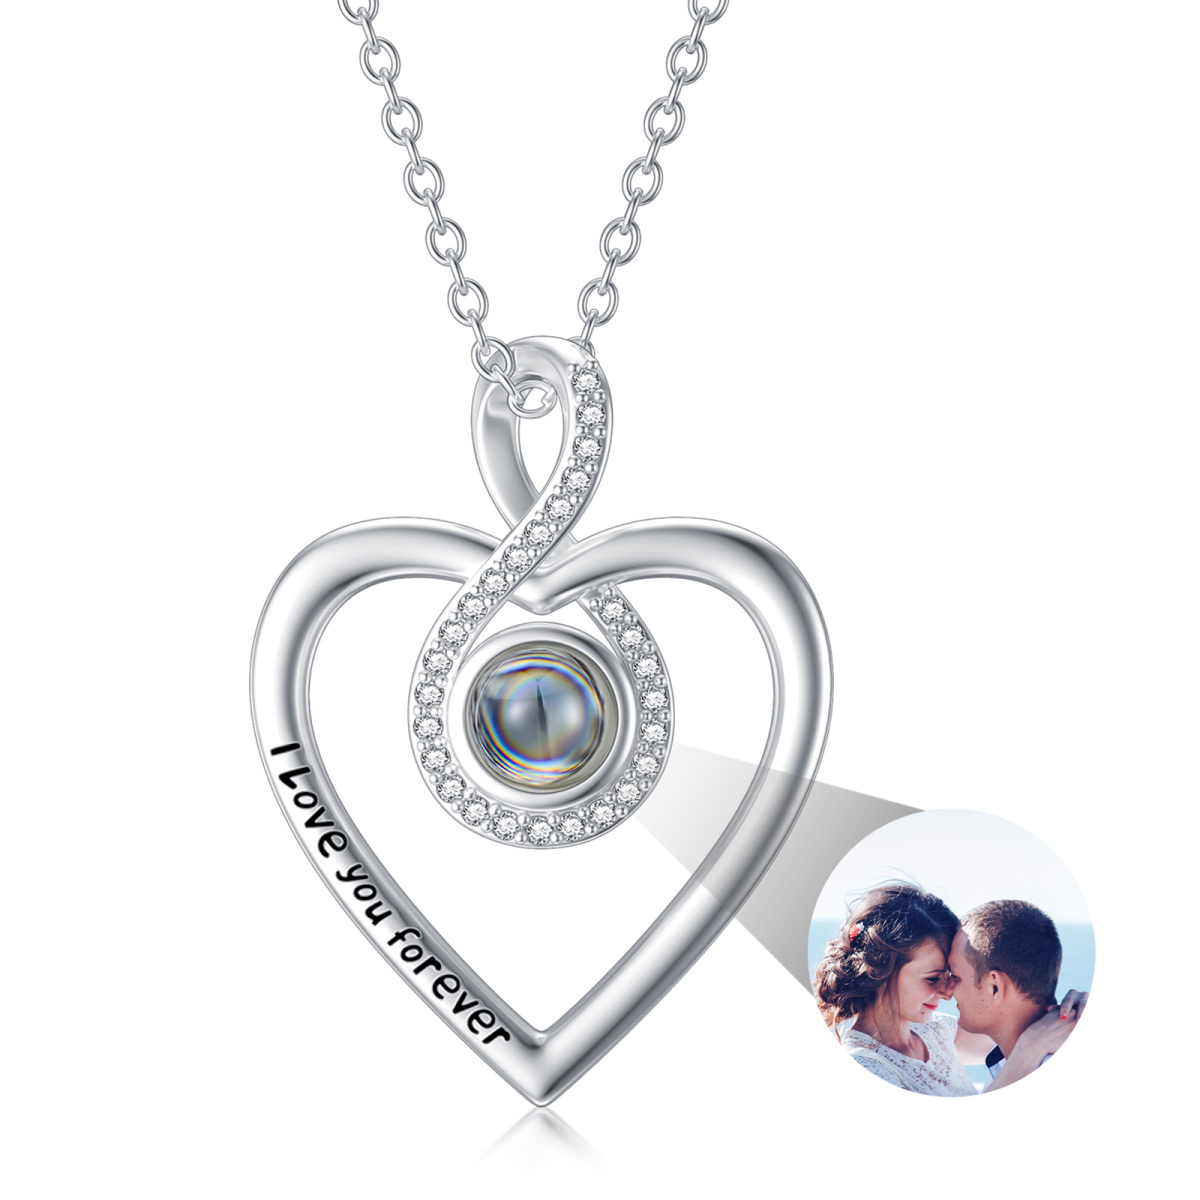 Sterling Silver Projection Stone & Personalized Projection Personalized Photo & Heart & Infinity Symbol Pendant Necklace with Engraved Word-1